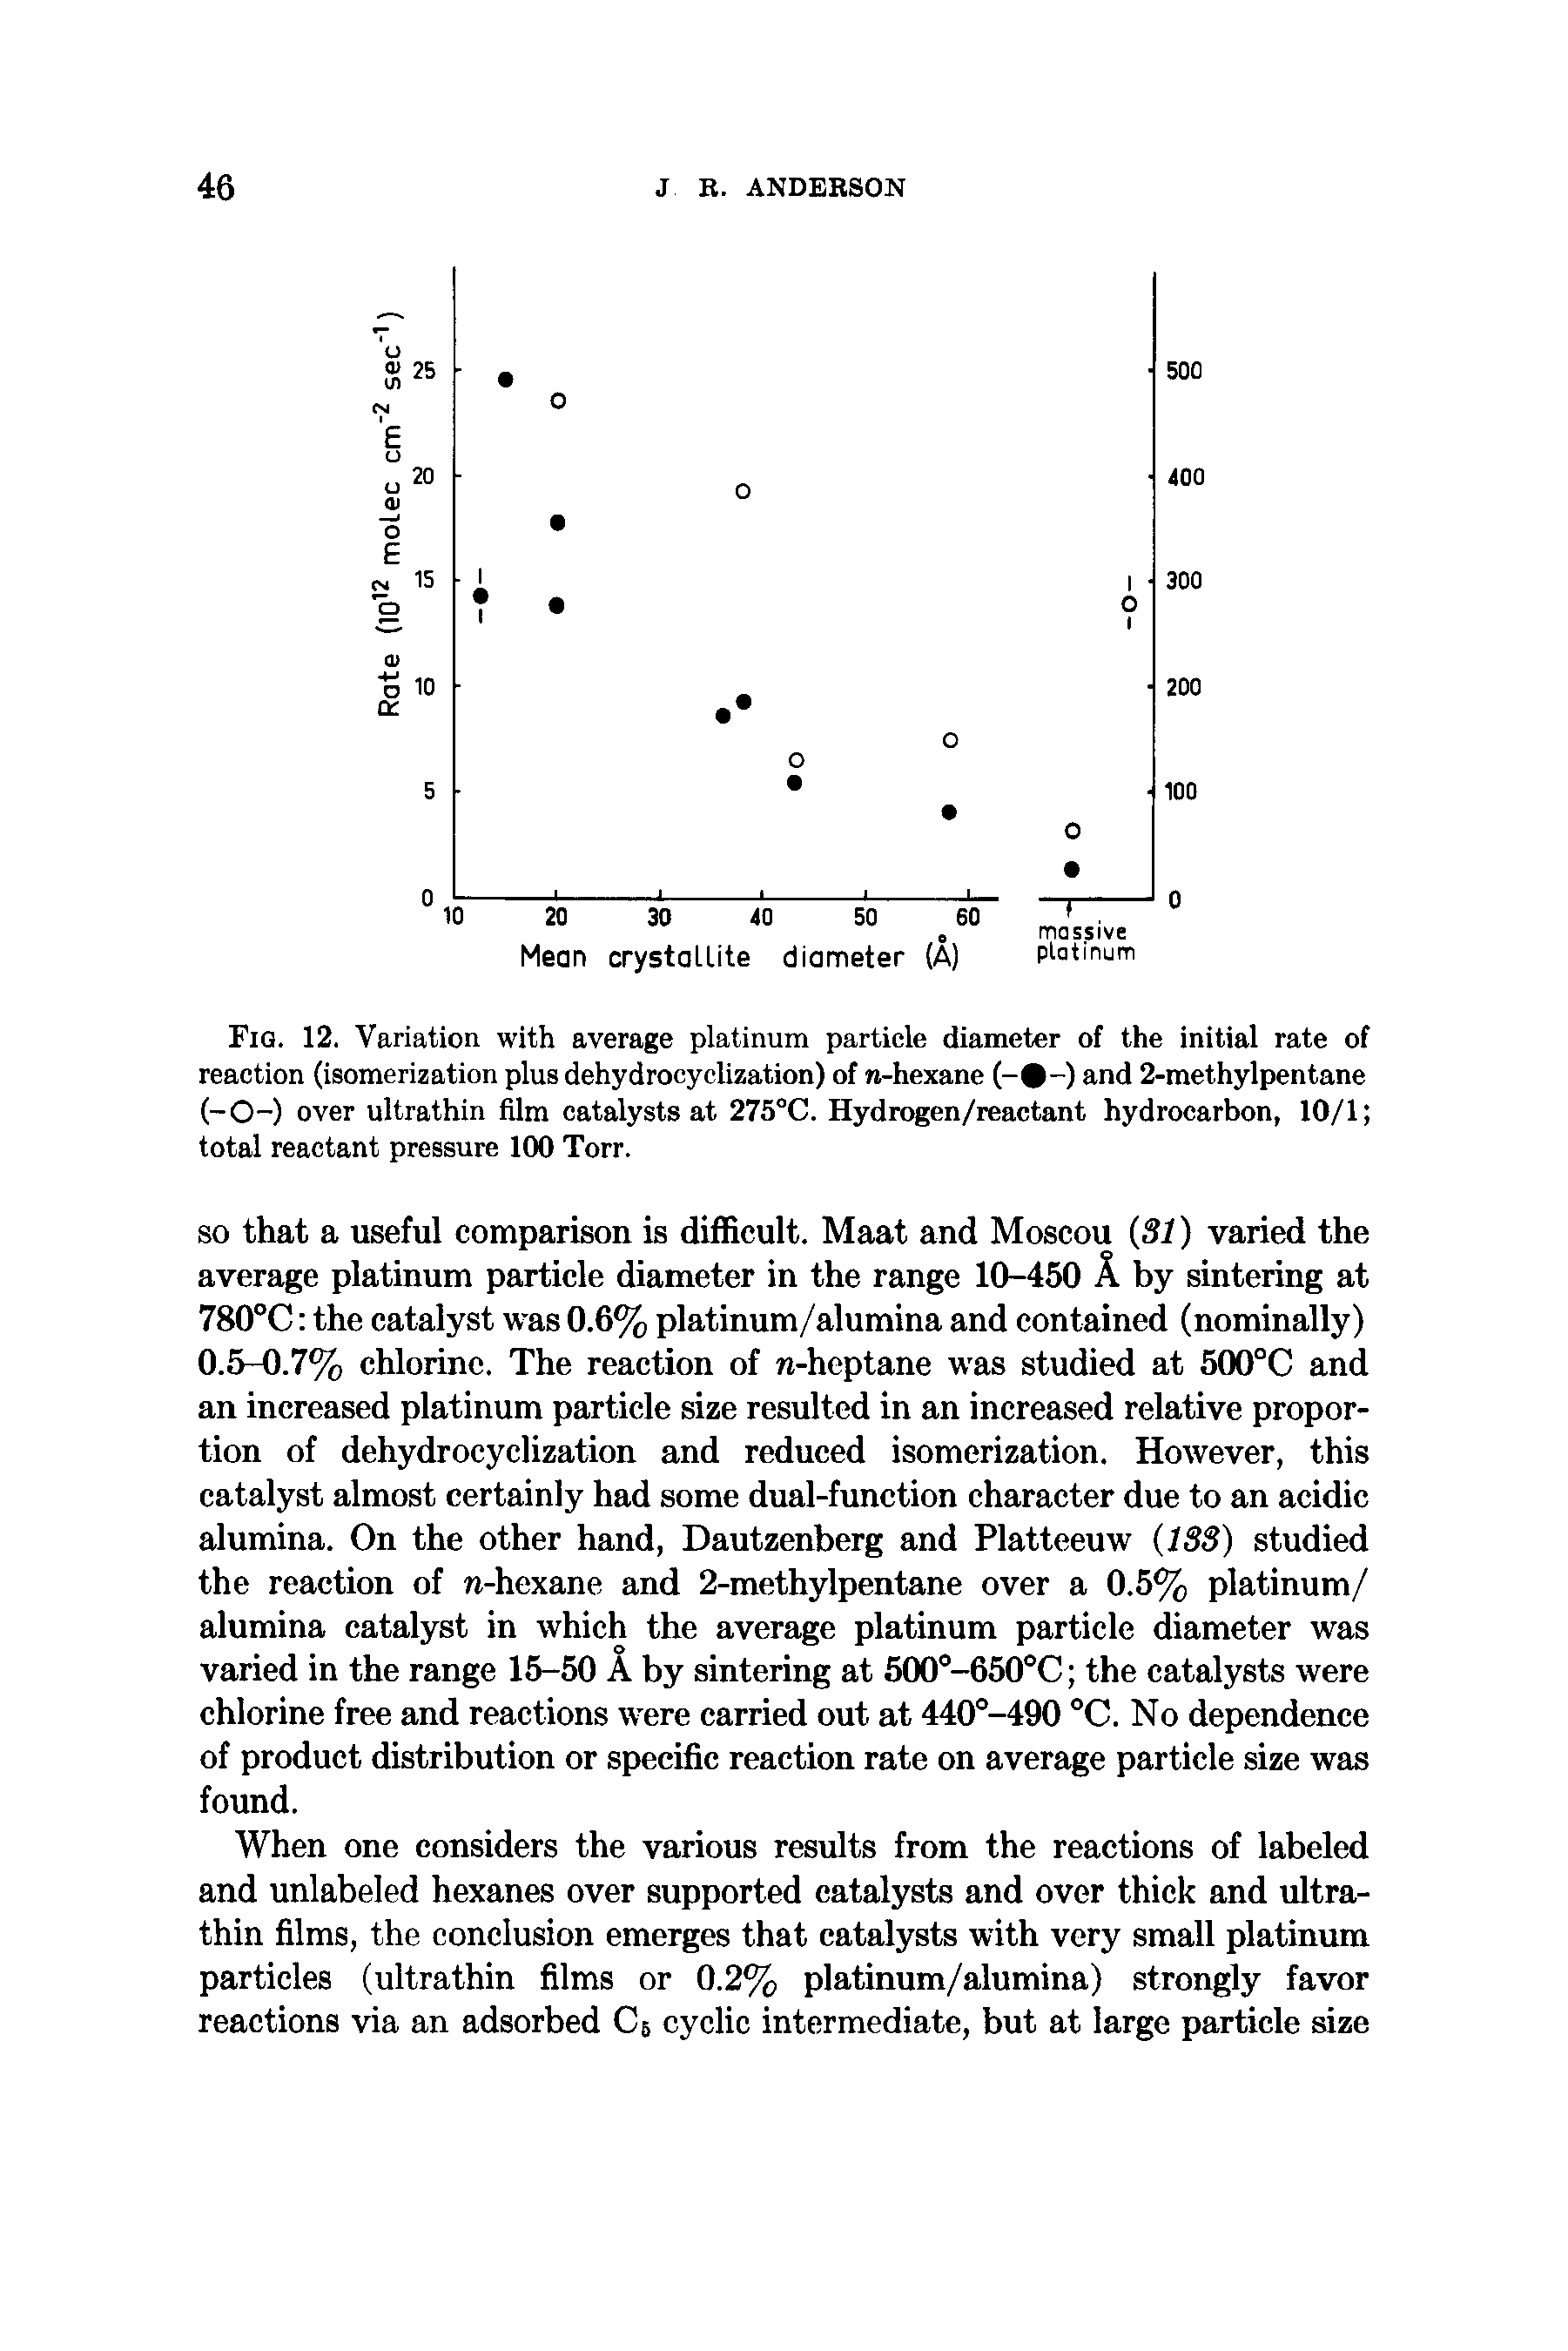 Fig. 12. Variation with average platinum particle diameter of the initial rate of reaction (isomerization plus dehydrocyclization) of n-hexane (- -) and 2-methylpentane (-O-) over ultrathin film catalysts at 275°C. Hydrogen/reactant hydrocarbon, 10/1 total reactant pressure 100 Torr.